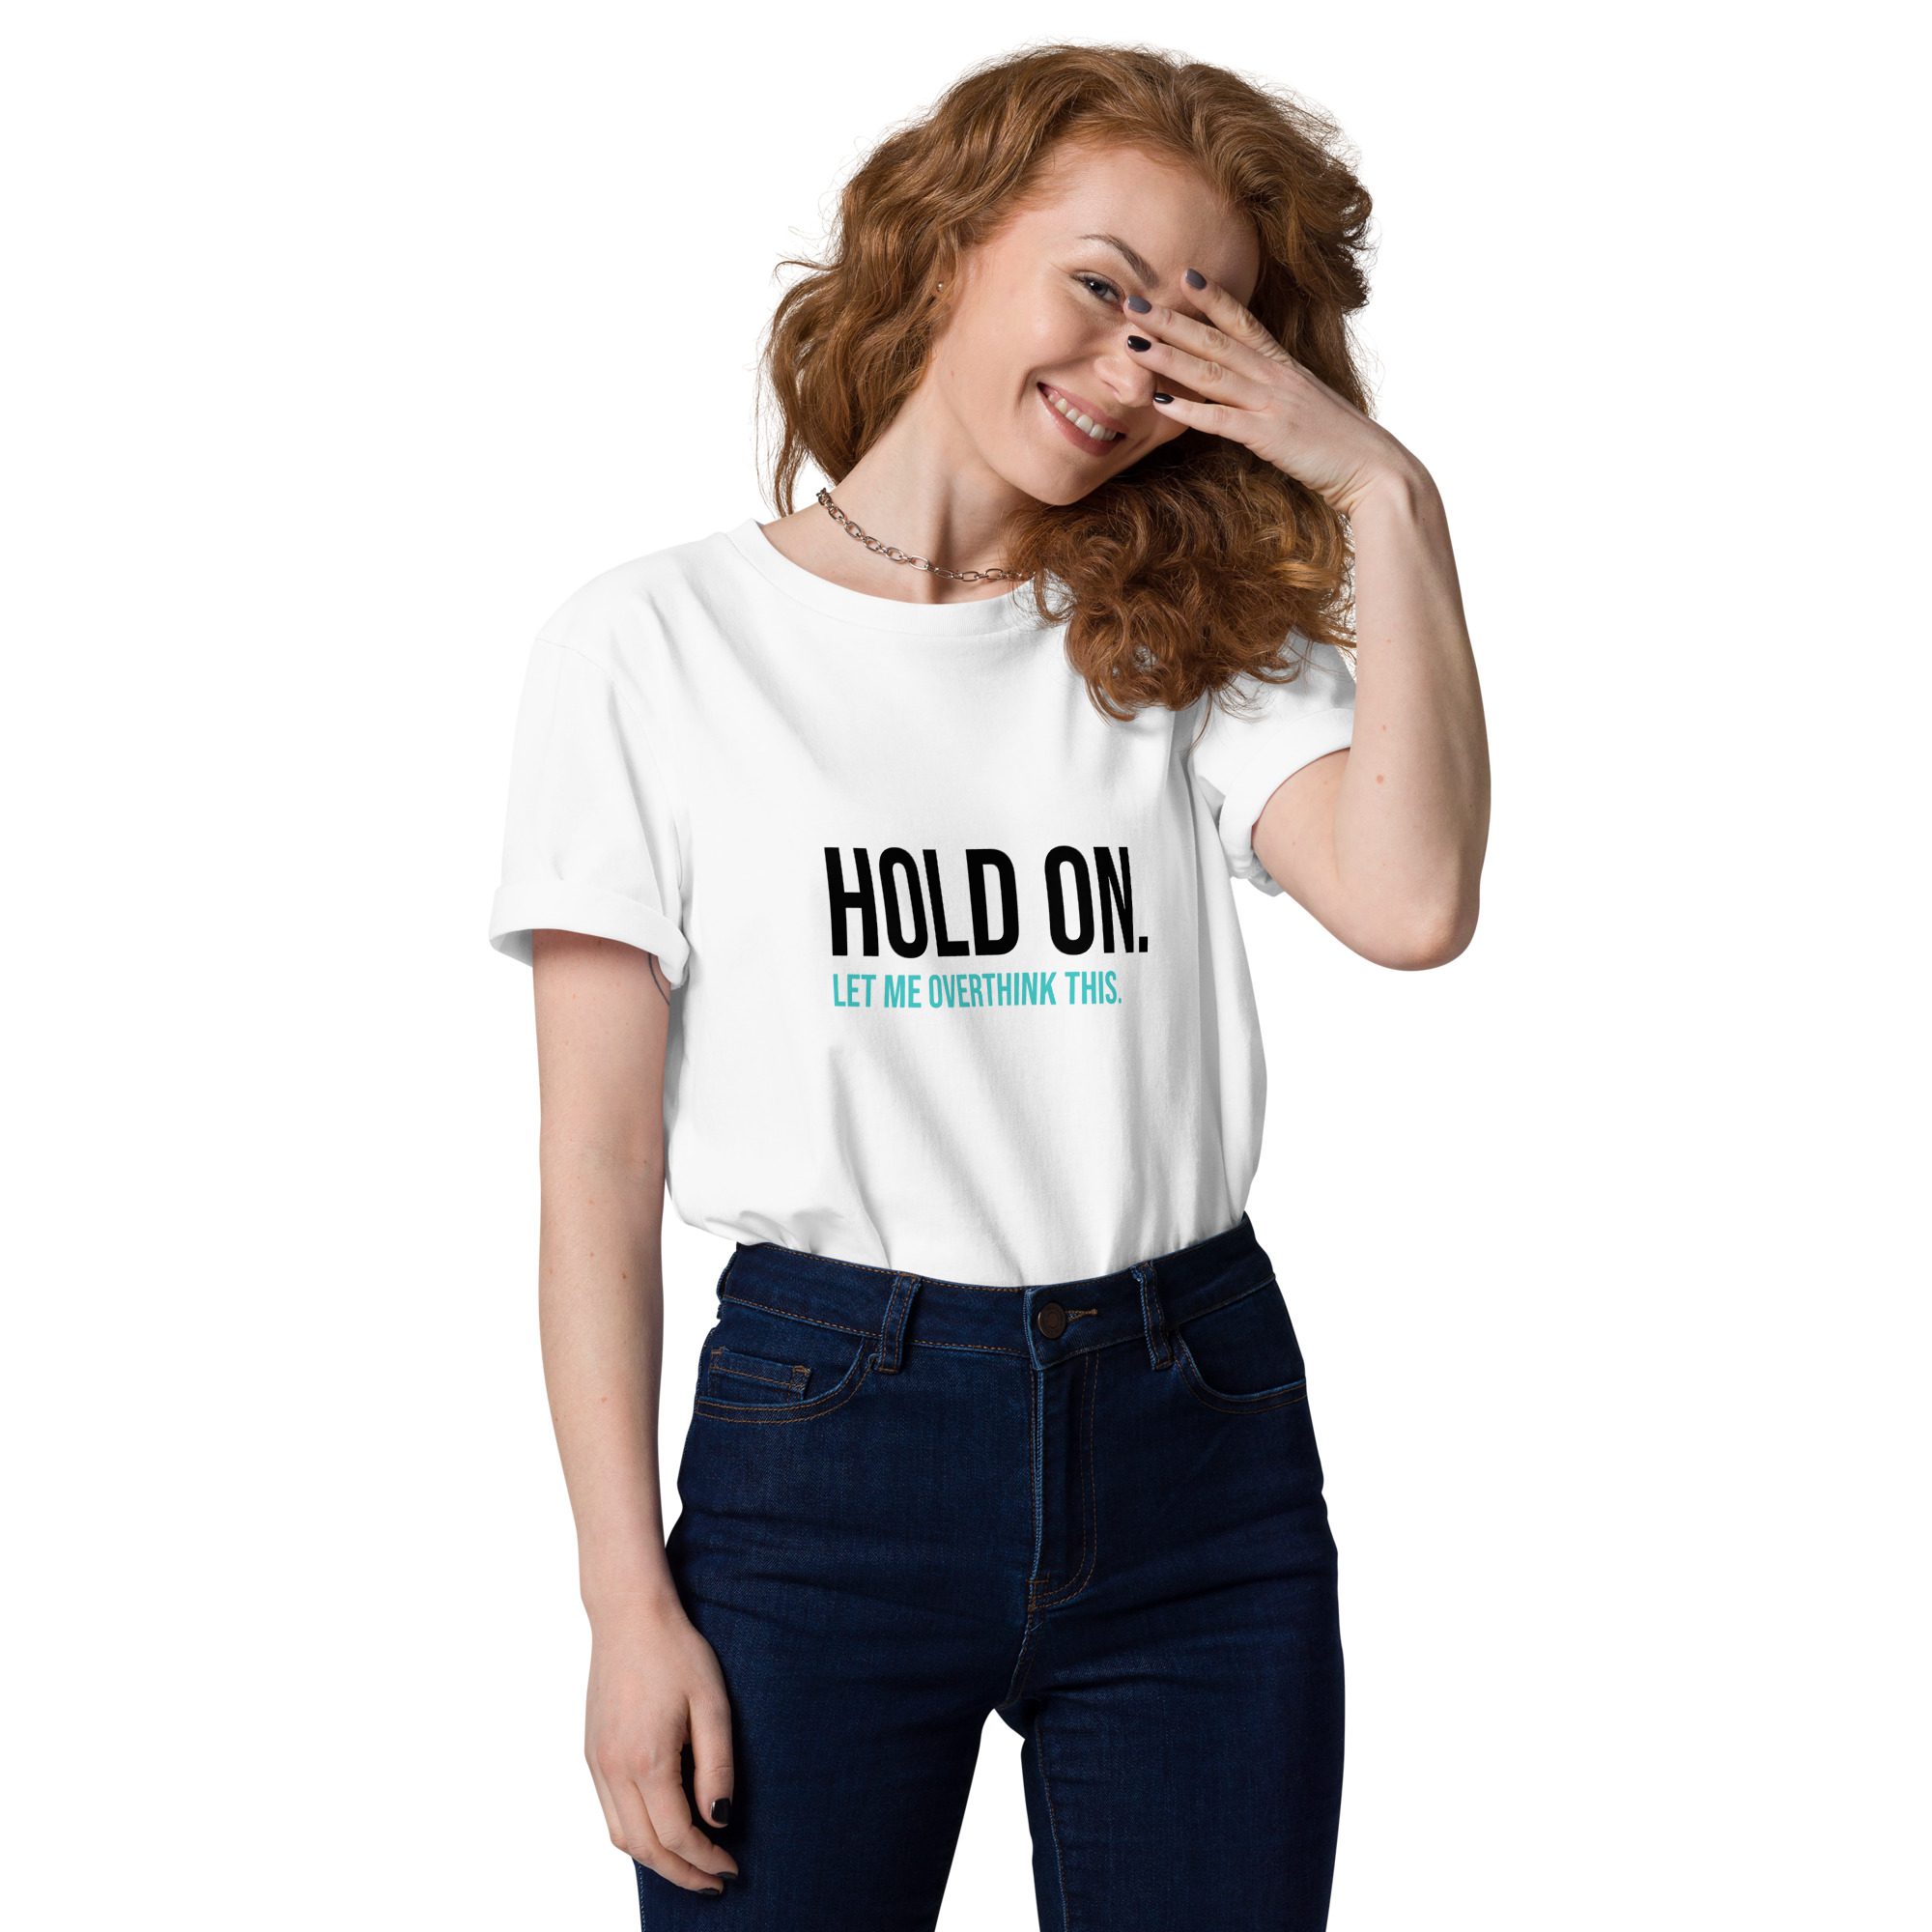 Hold On Let Me Overthink This Unisex Organic Cotton T-shirt